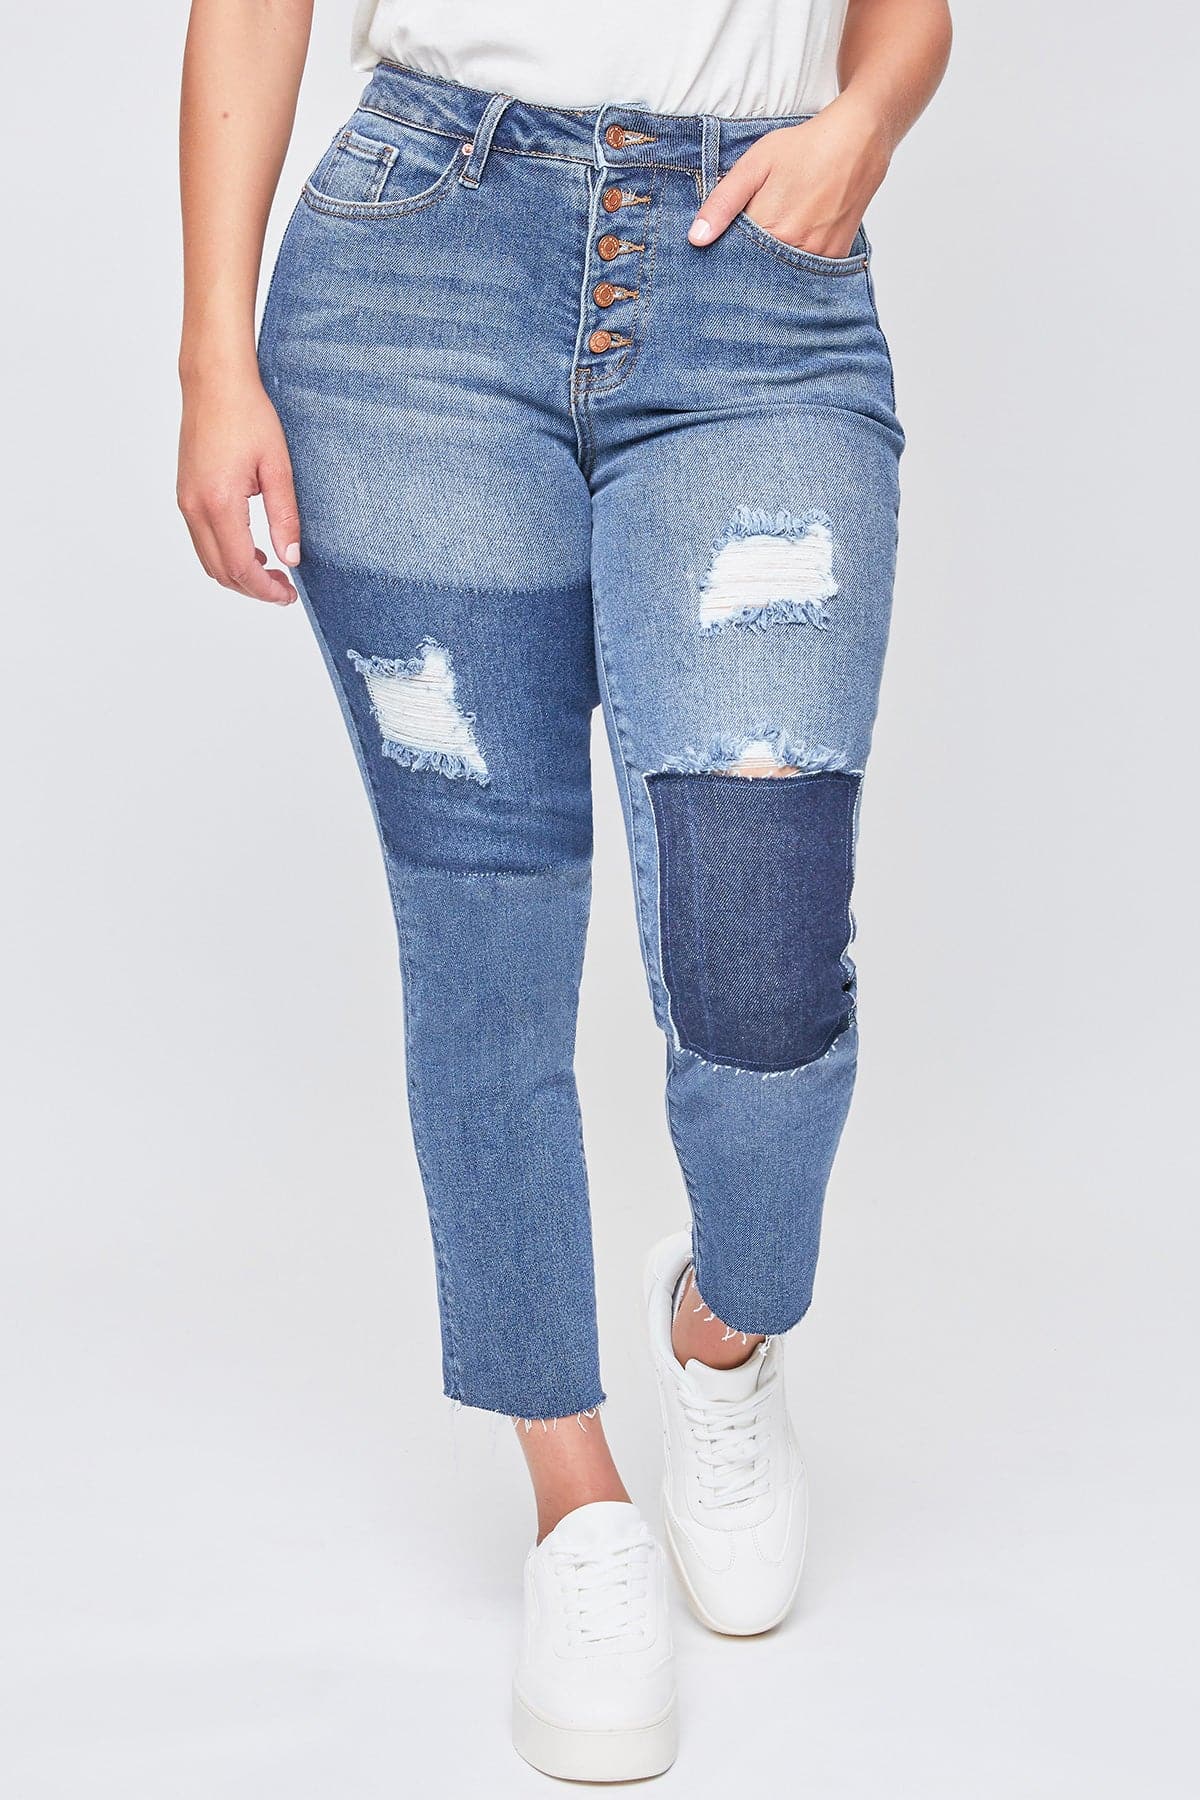 Women’s Vintage Dream Exposed Button Fly Raw Hem Ankle Jeans